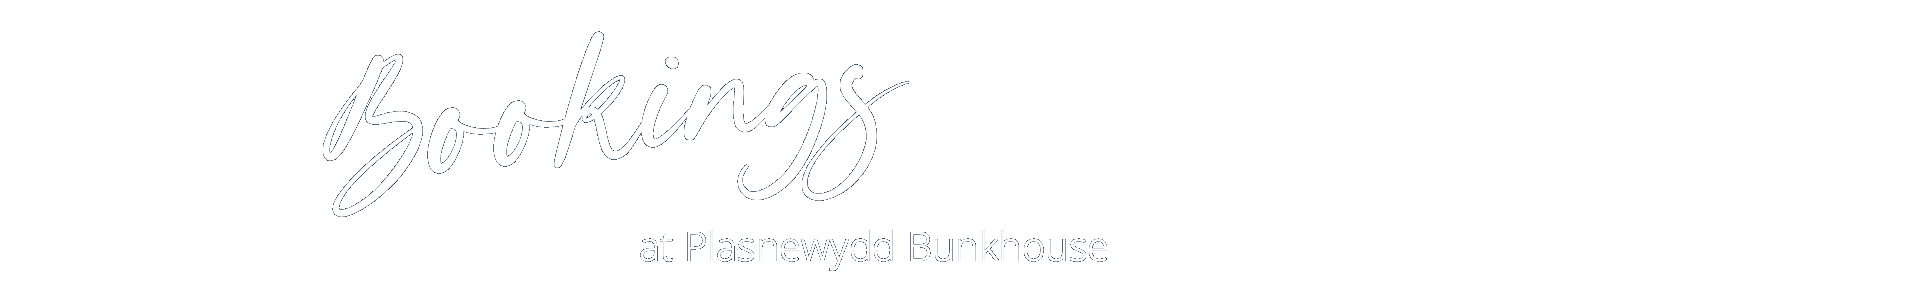 Bookings at Plasnewydd Bunkhouse